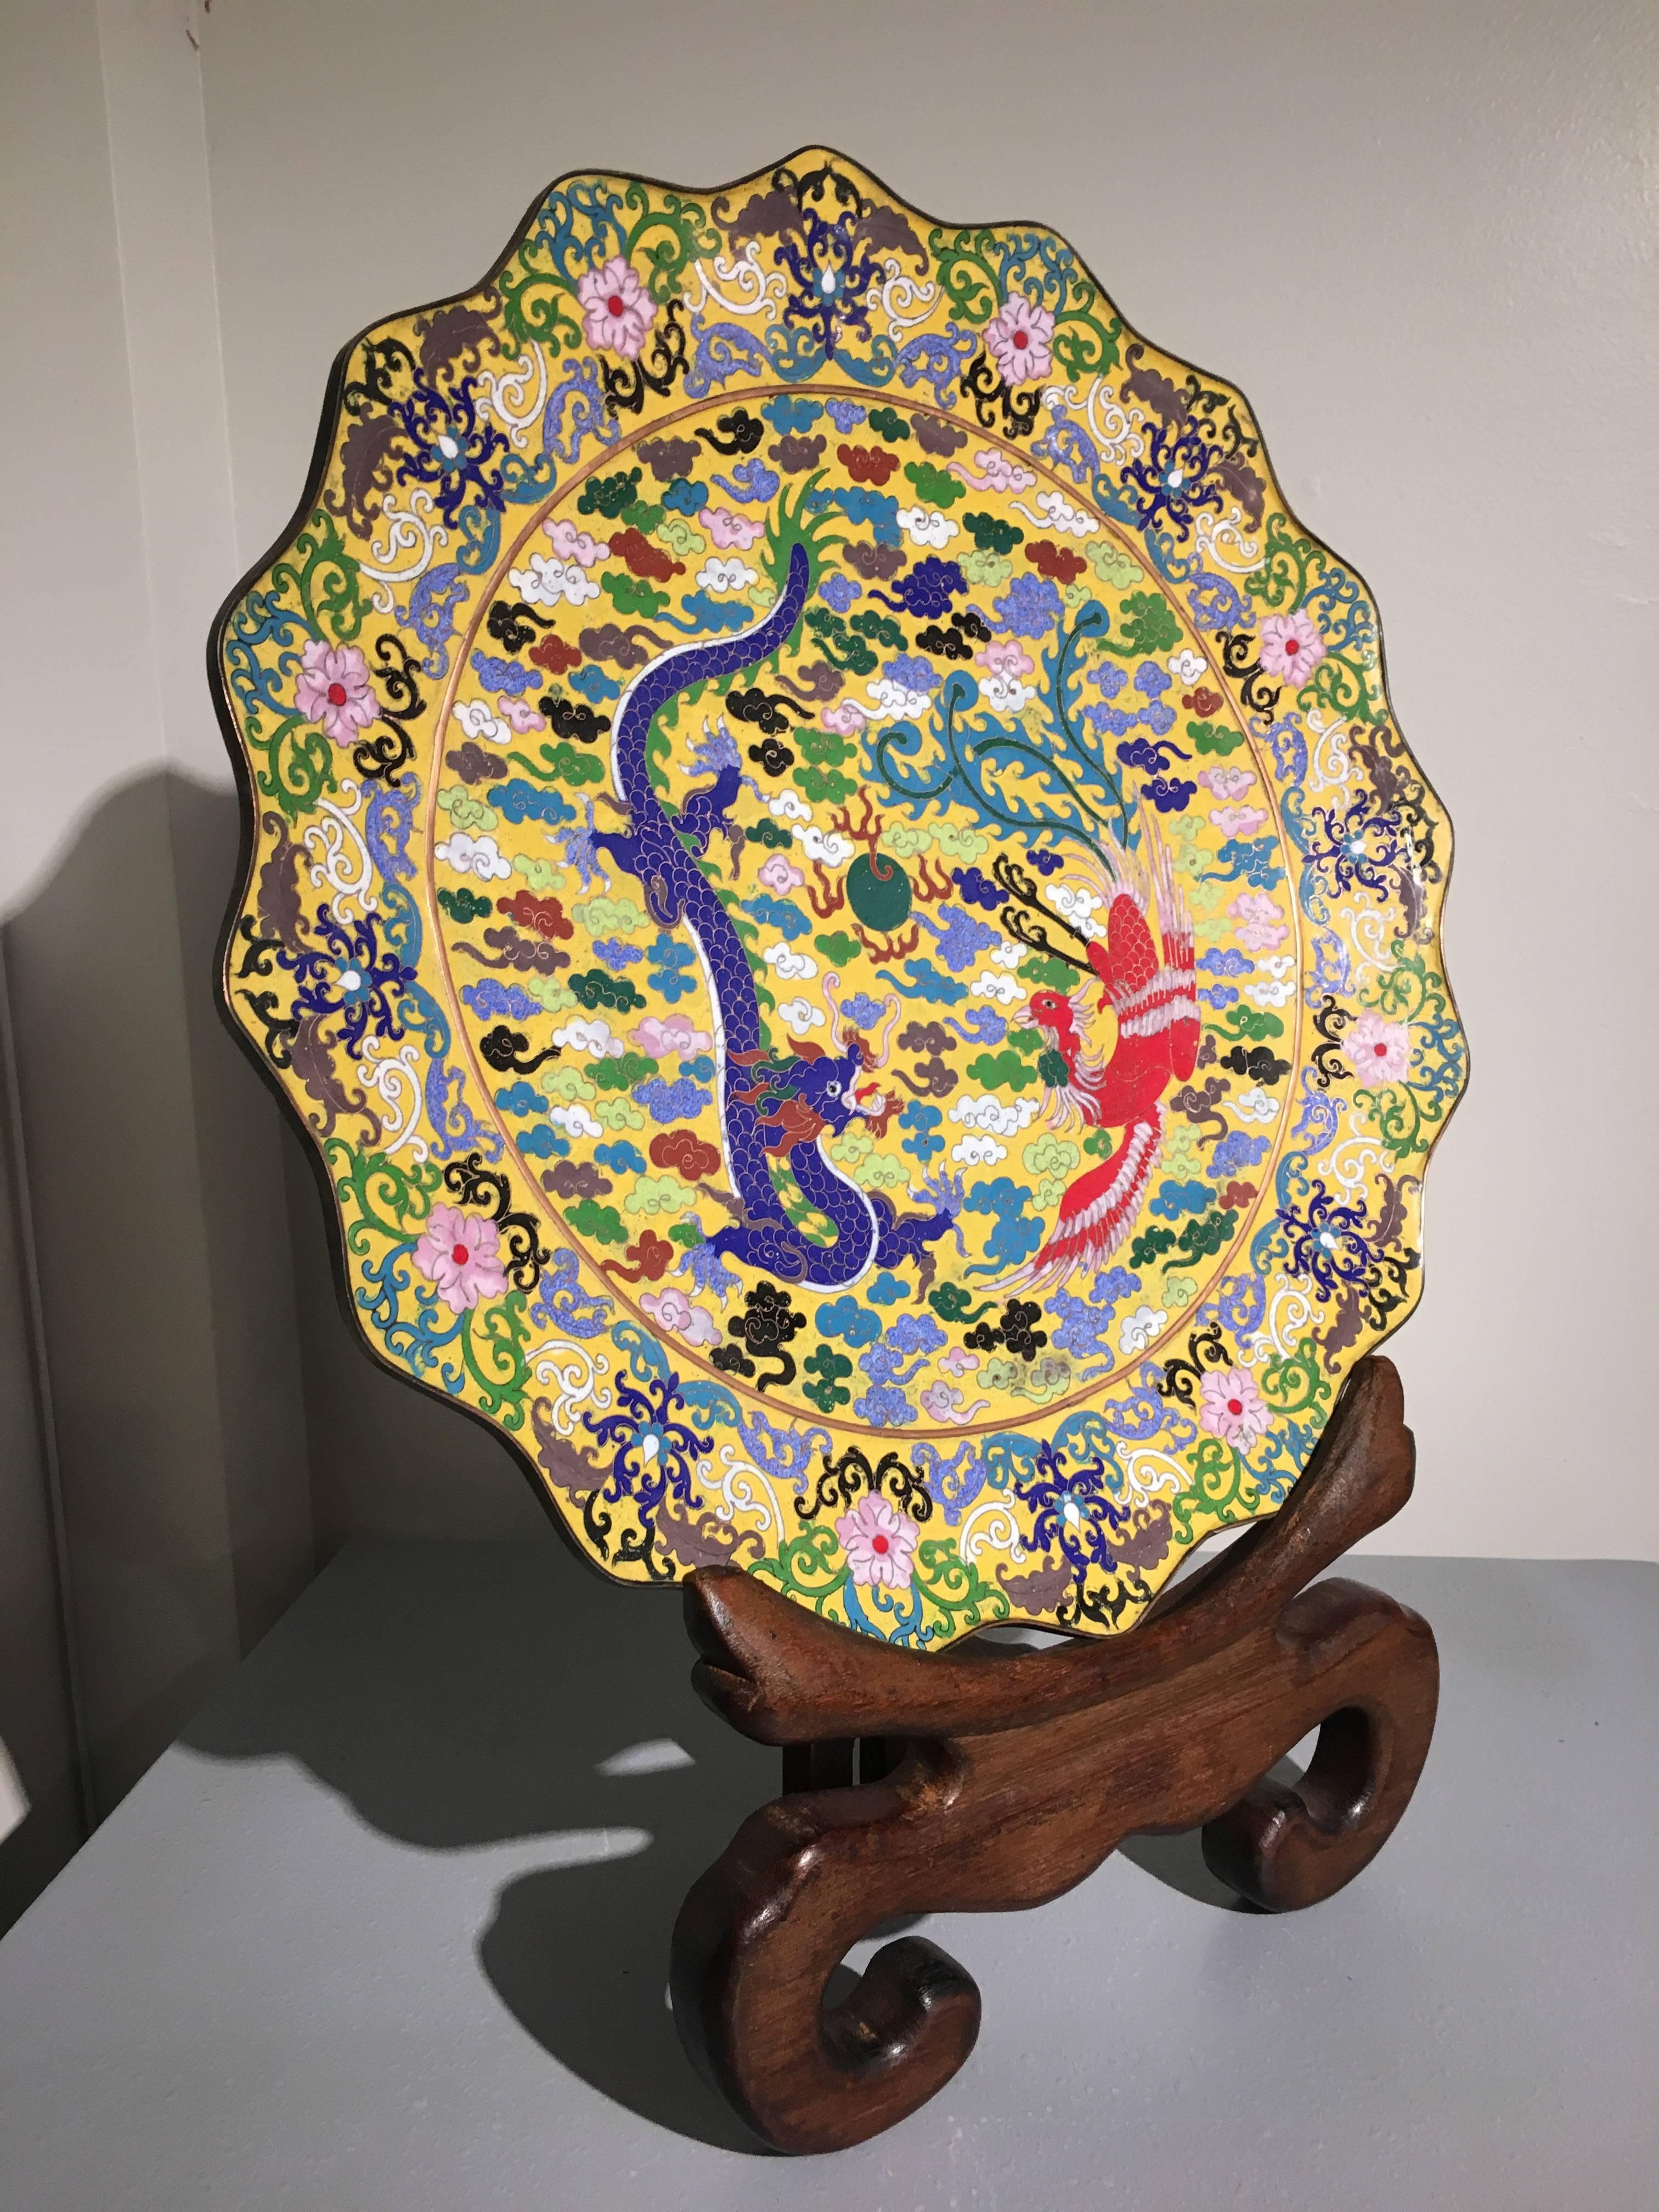 A stunning and impactful large, Chinese Republic period, yellow ground dragon and phoenix marked cloisonné charger.
The charger with a foliate rim and a central decoration of a blue dragon and red phoenix, both in flight amongst stylized clouds,